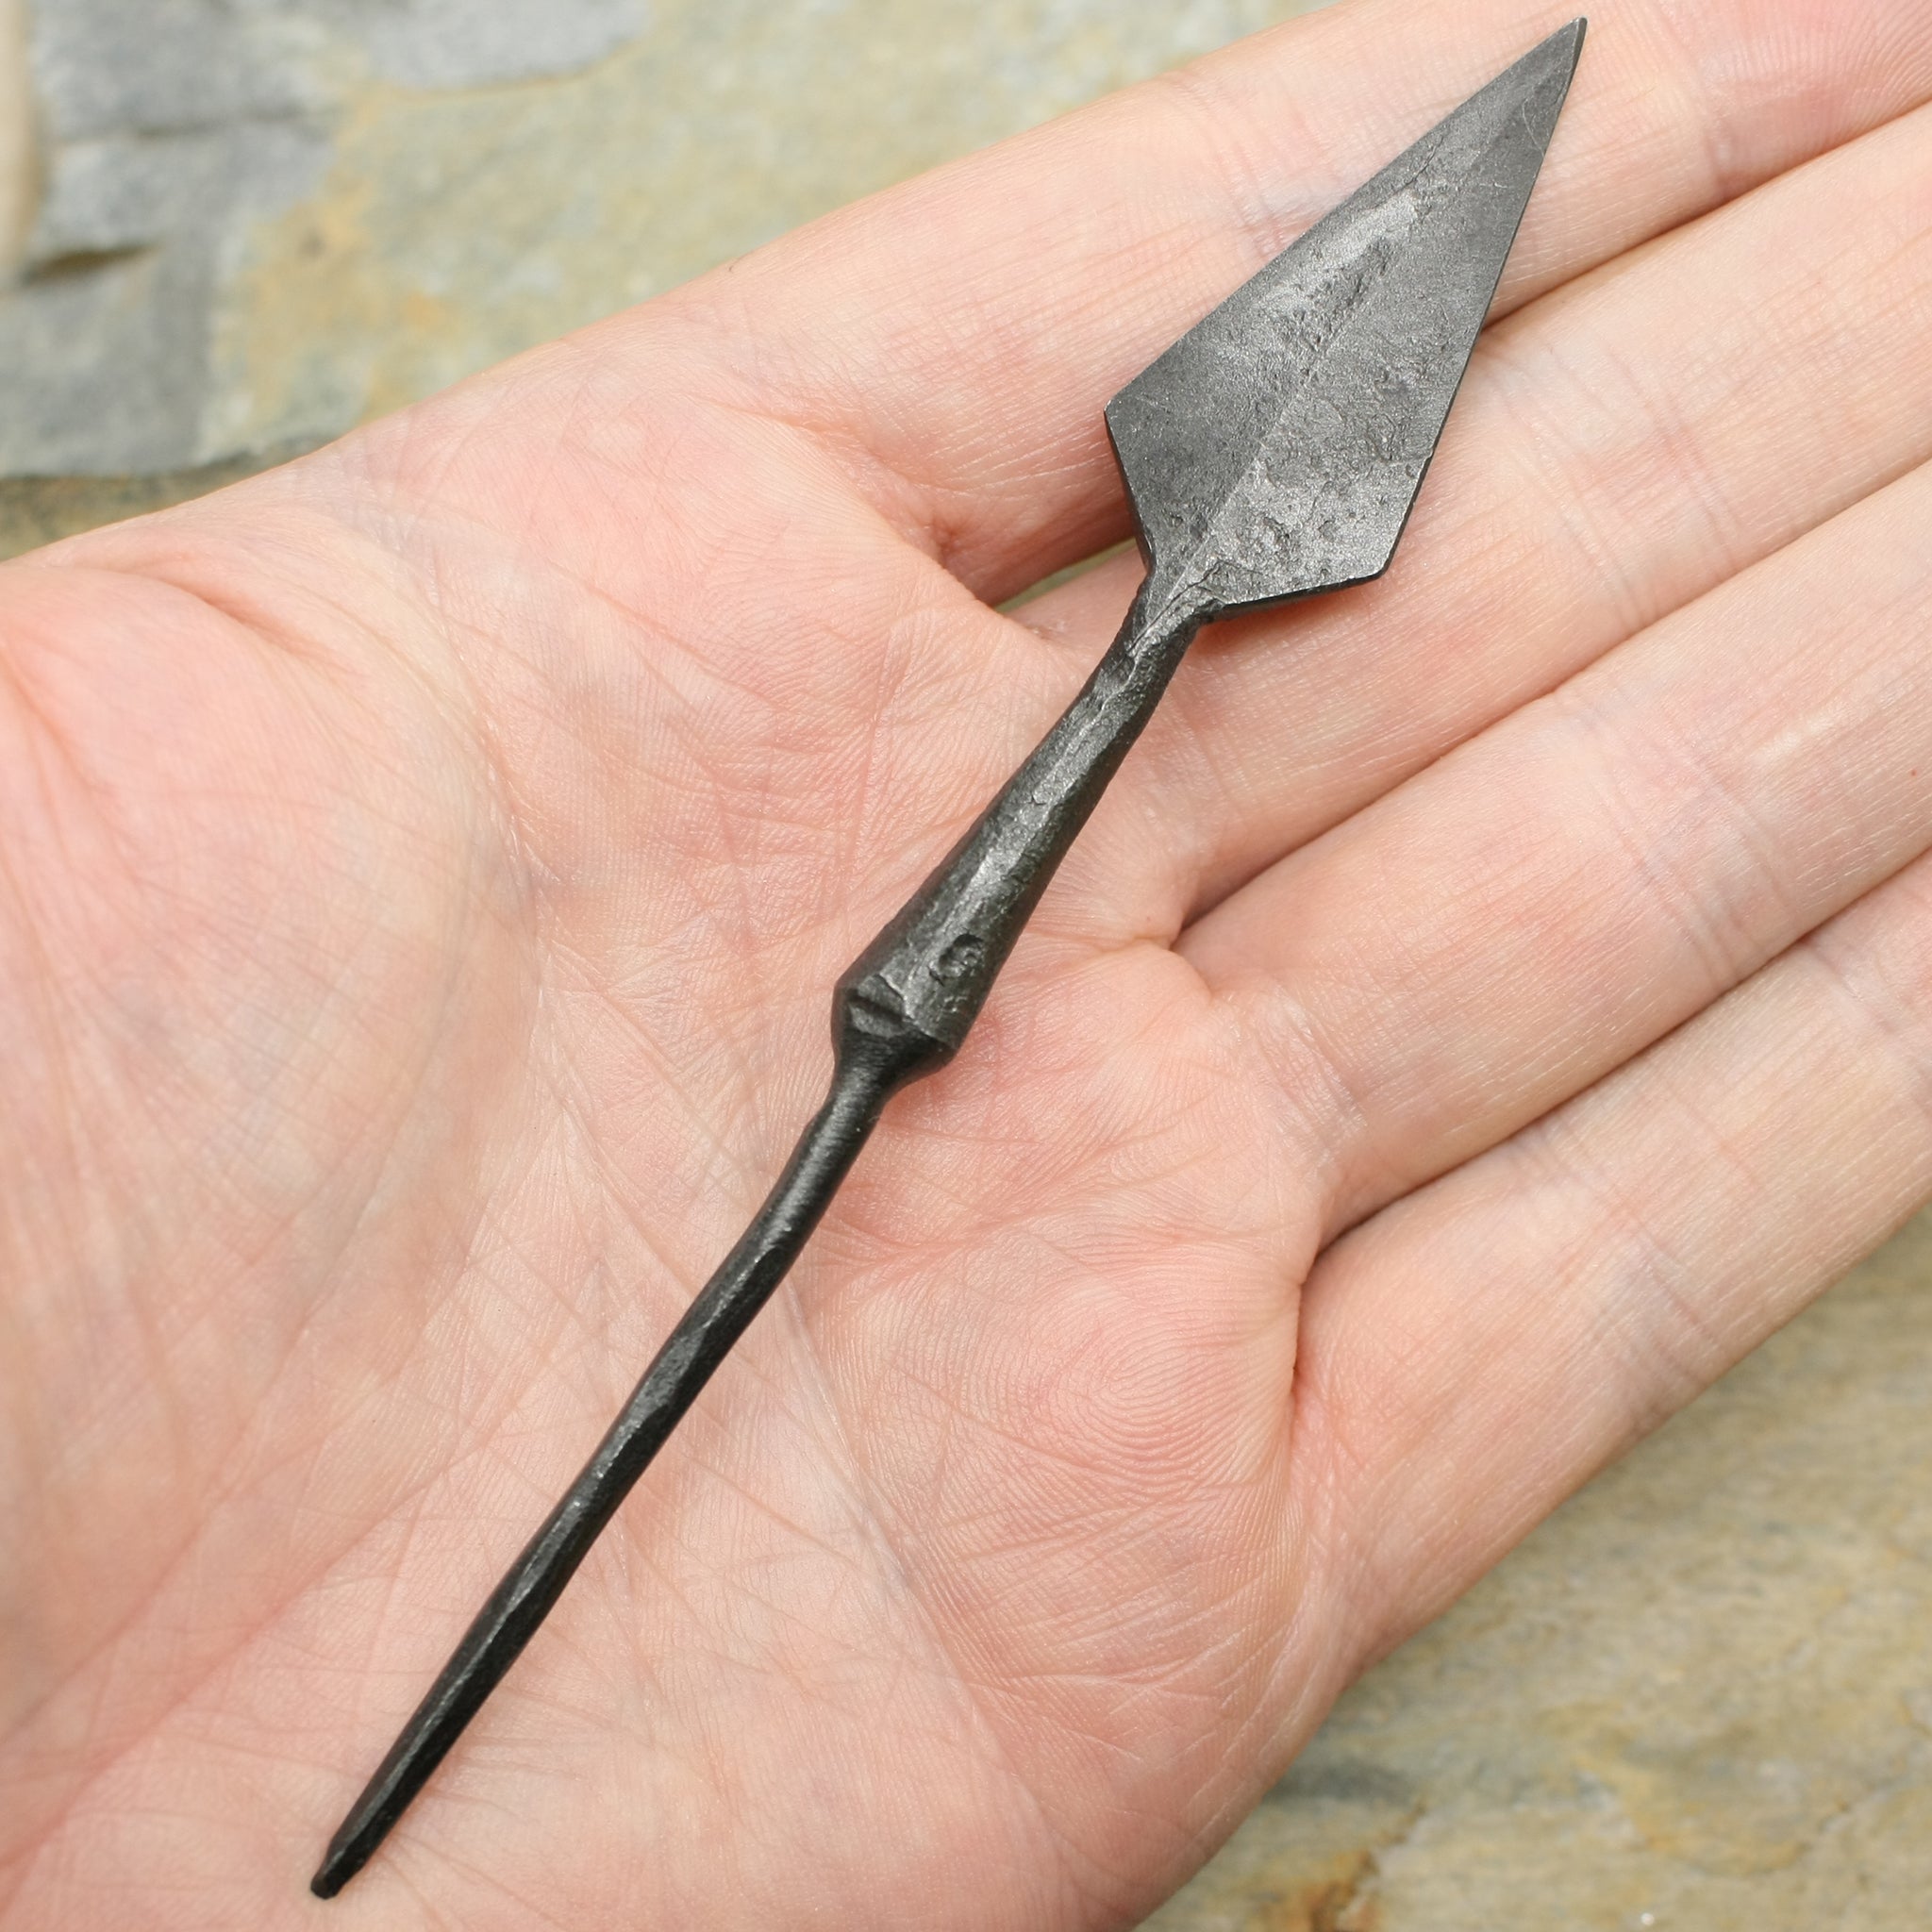 Hand-Forged Iron Arrowhead with Tang on Hand